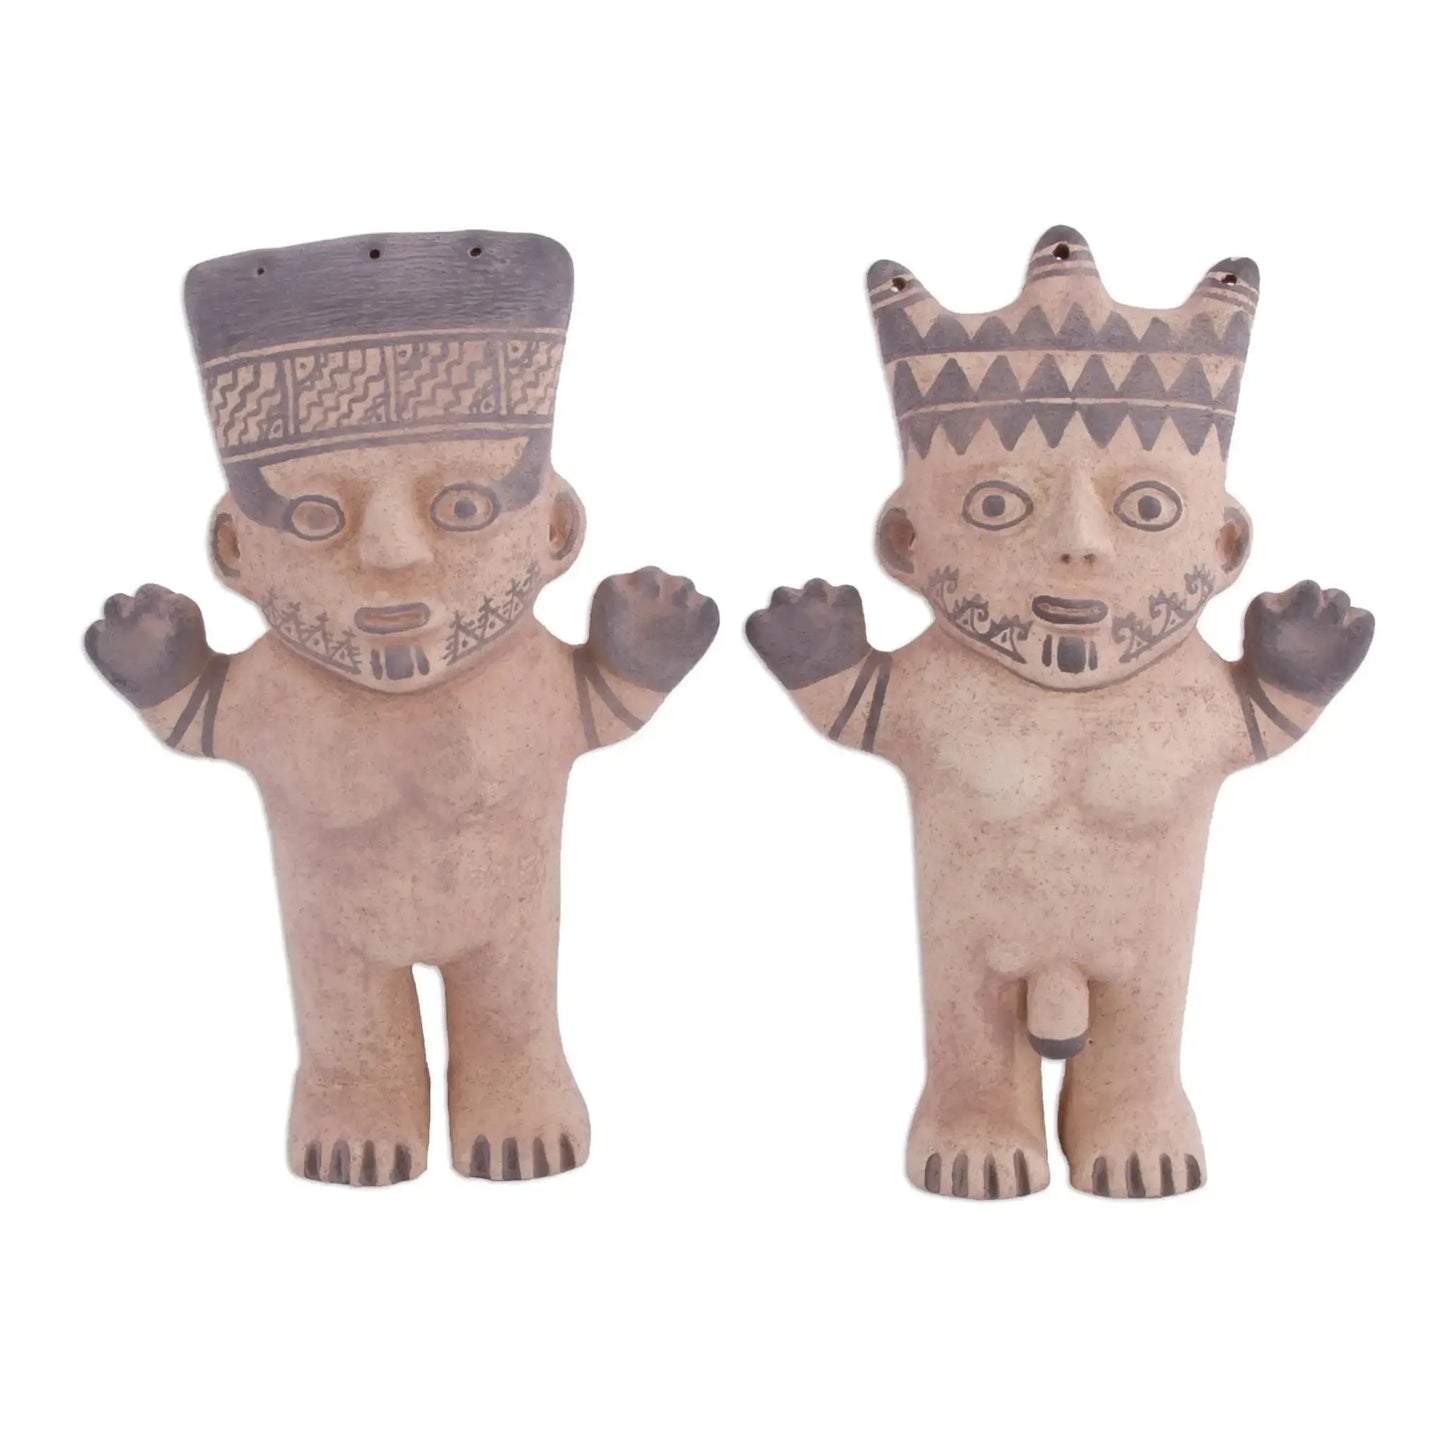 Male and Female Chancay Duality - Ceramic Replica Sculptures